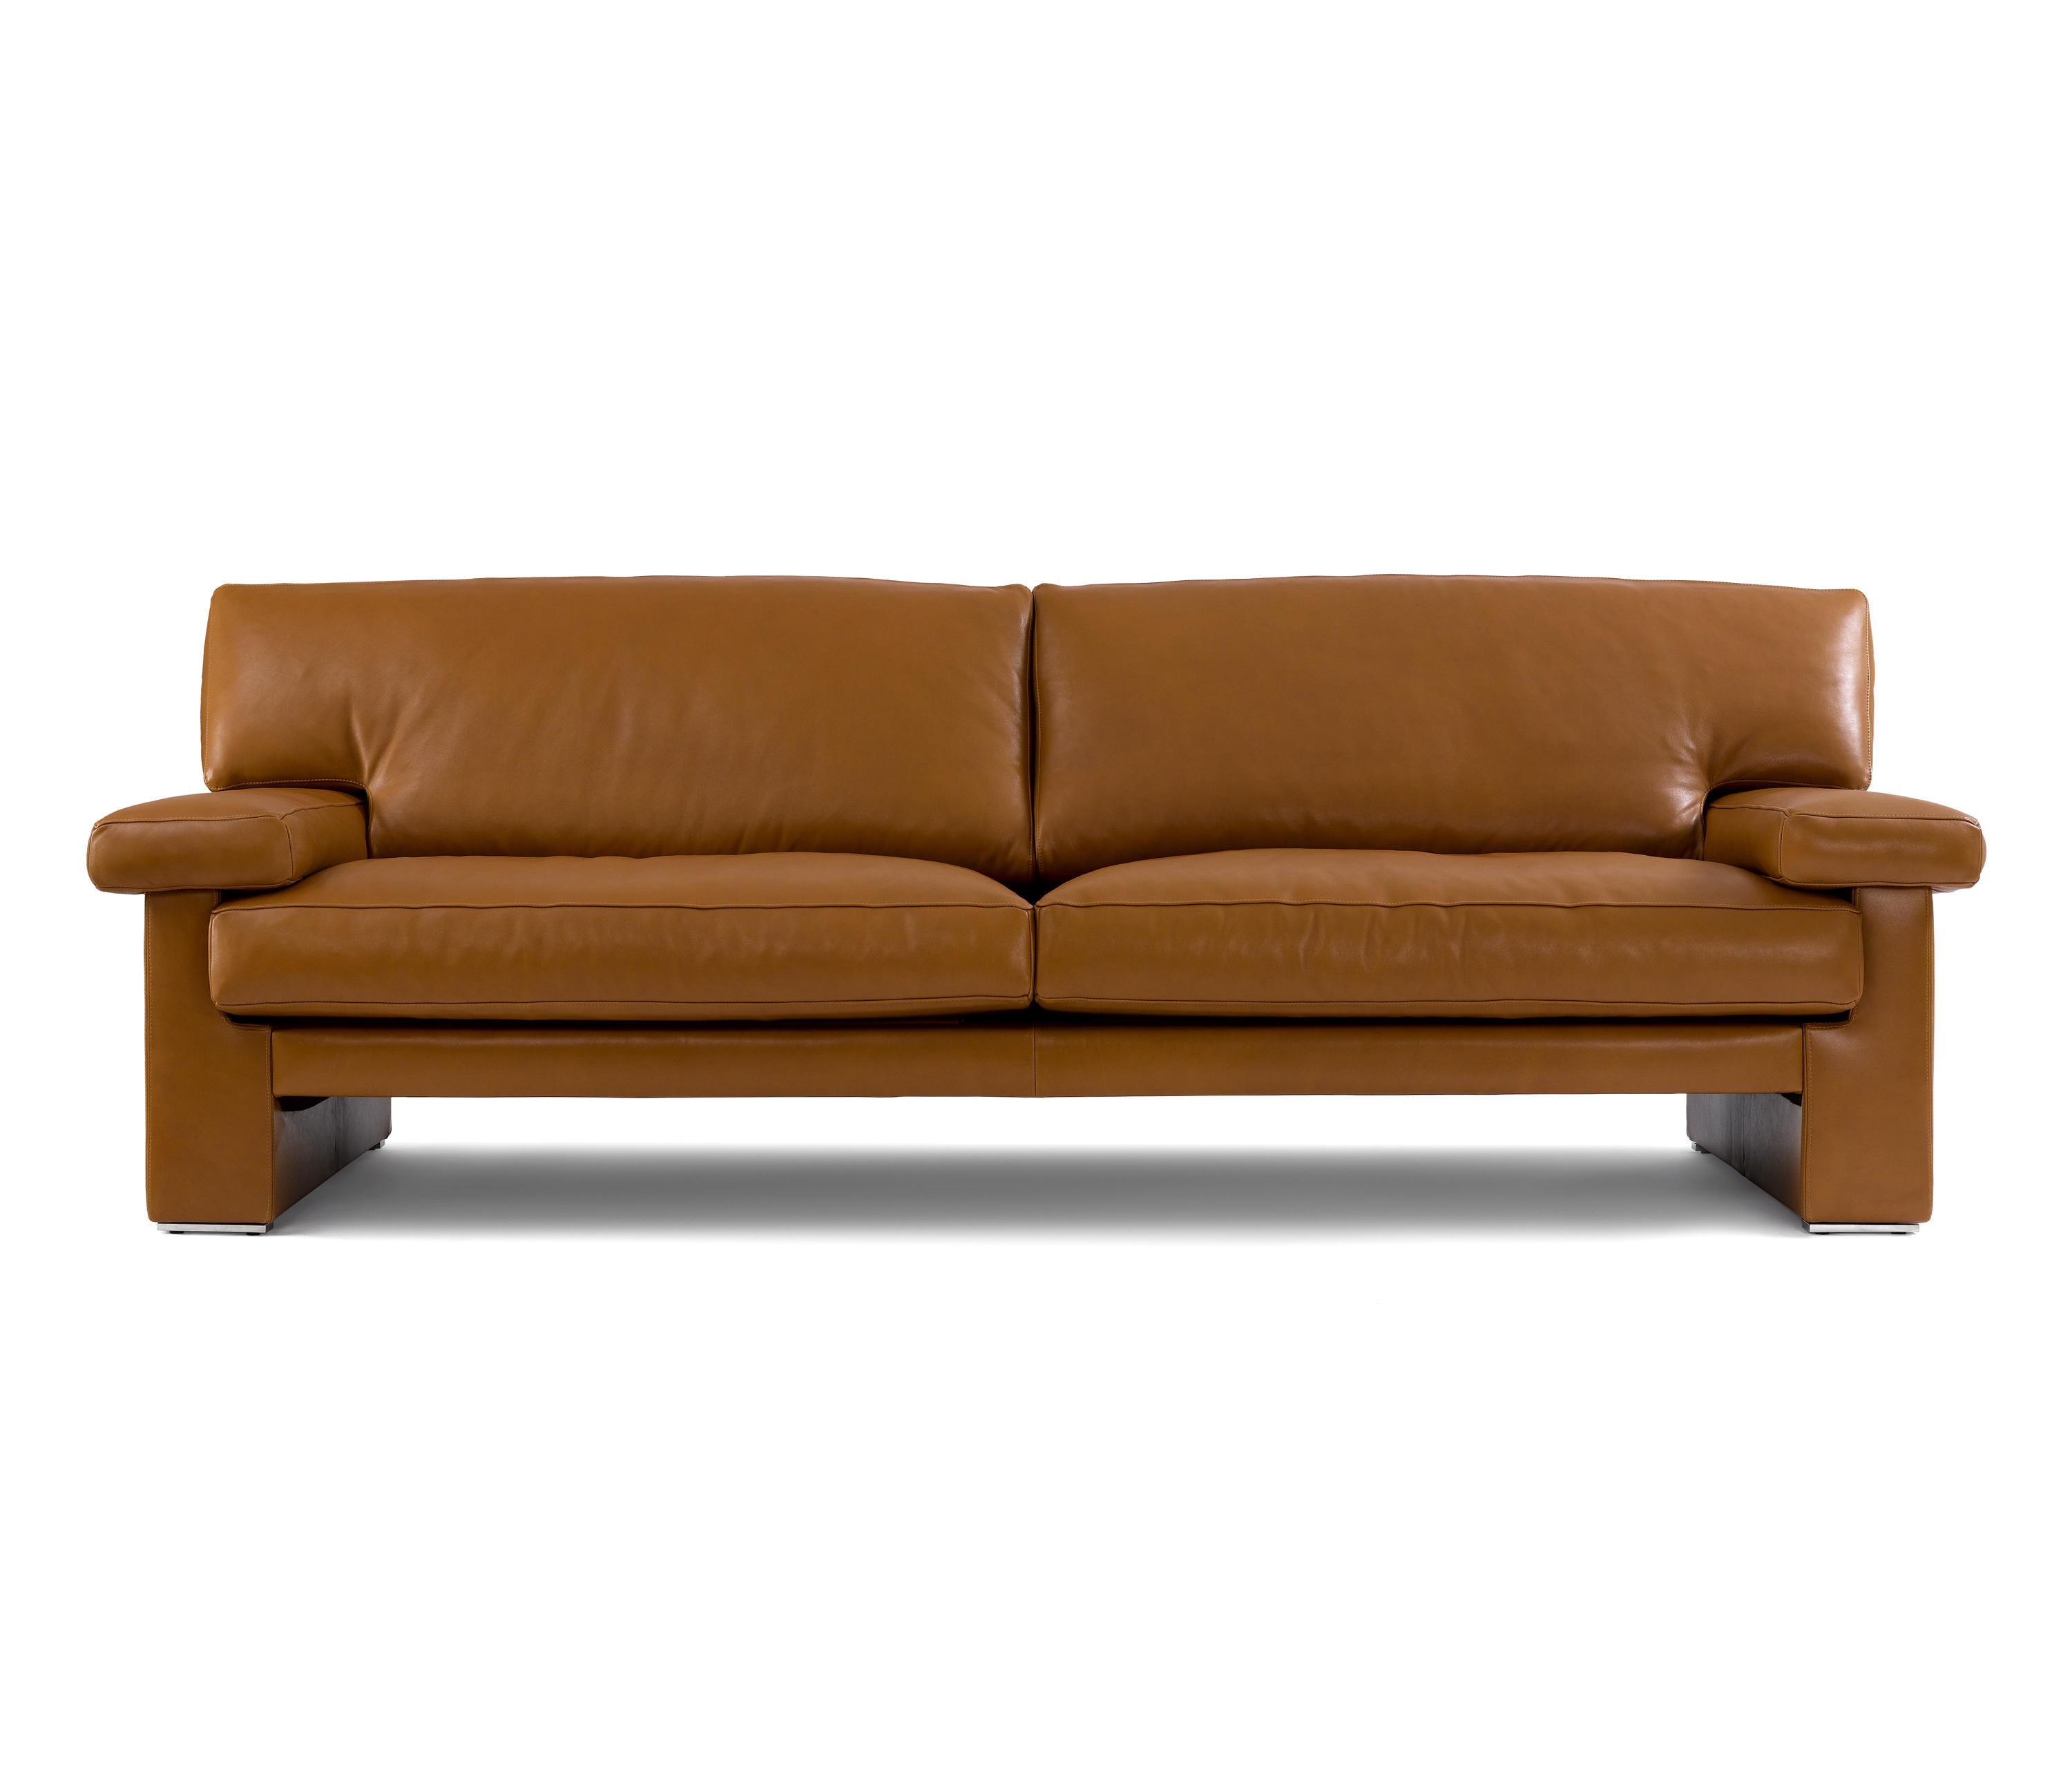 Ticino Sofa by Durlet